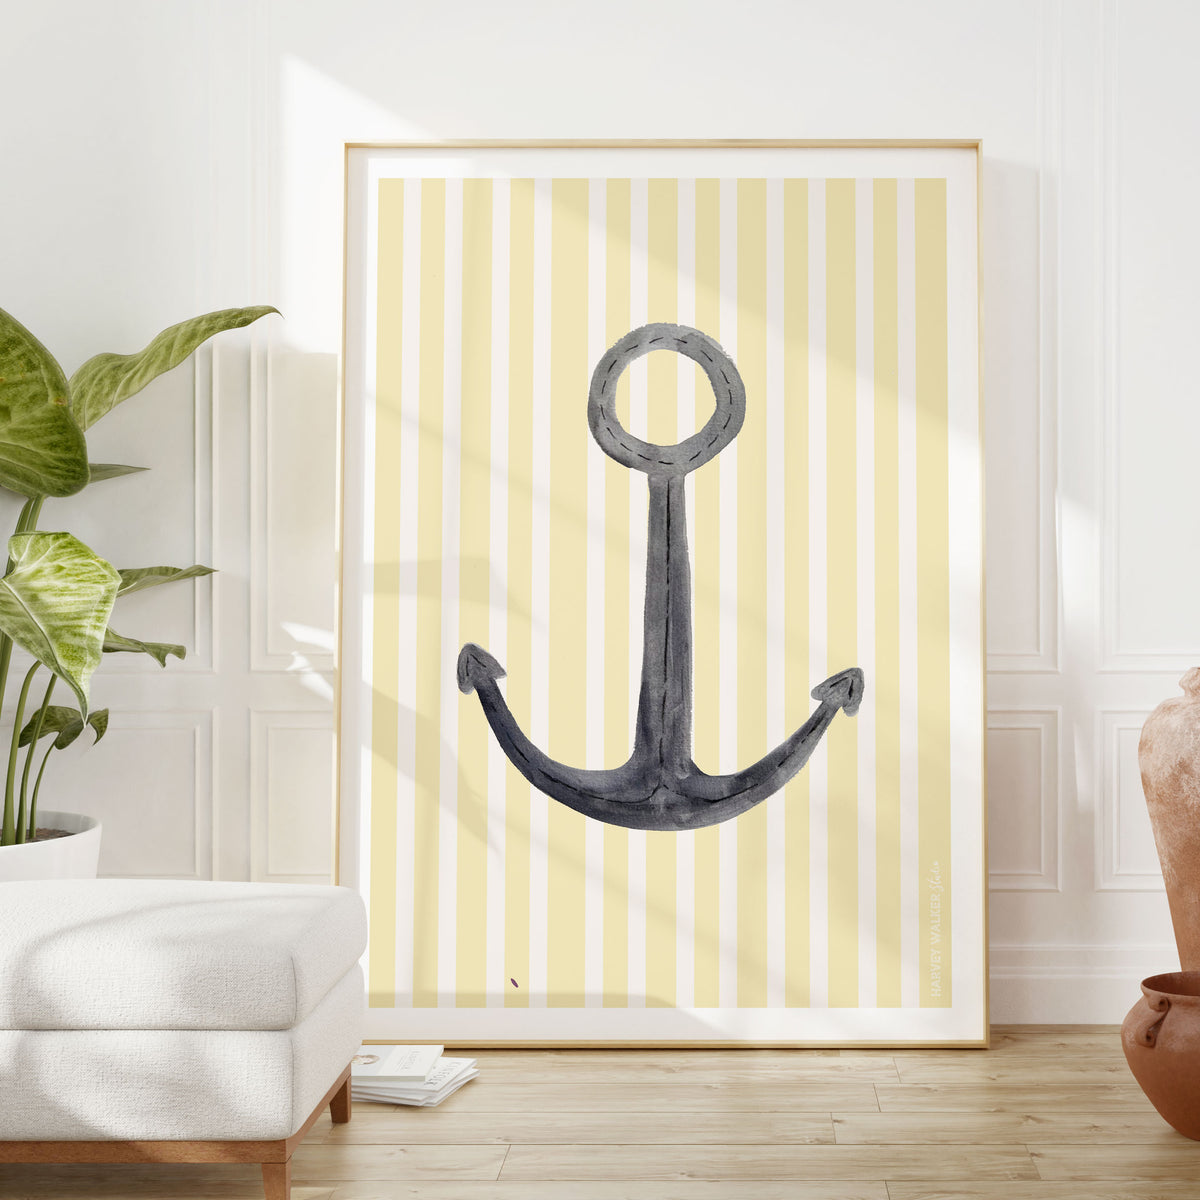 Large framed artwork for mid century and modern coastal homes. Bring a pop of colour to your home with this striking nautical print. In yellow and white stripes with dark contrasting anchor. Hand illustrated watercolours.